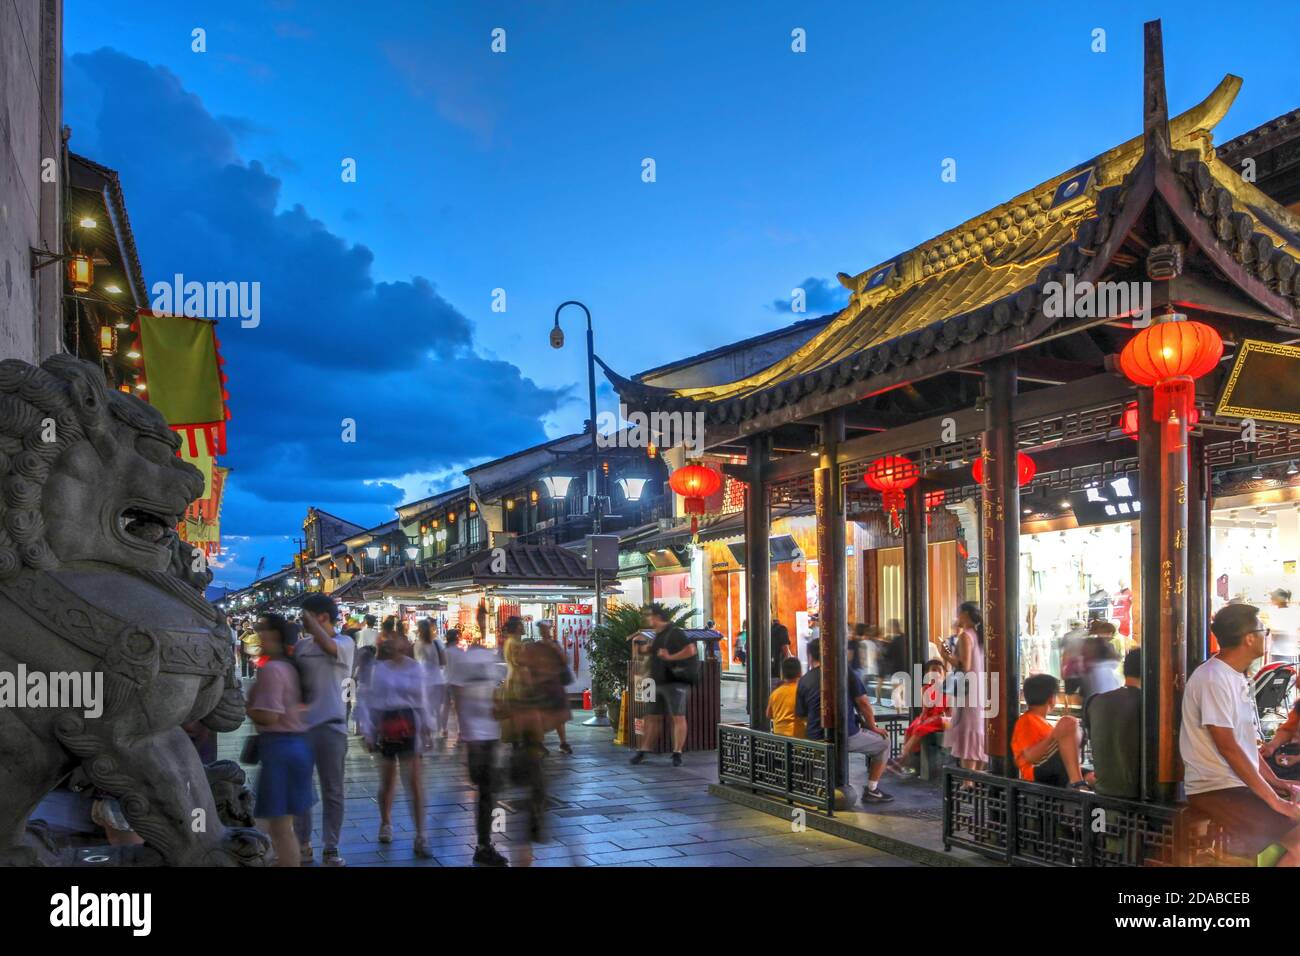 Night scene along historical Hefang Street in Hangzhou, China featuring the entrace to Hu Qing Yu Tang, a famous herbal chinese medicine. Stock Photo